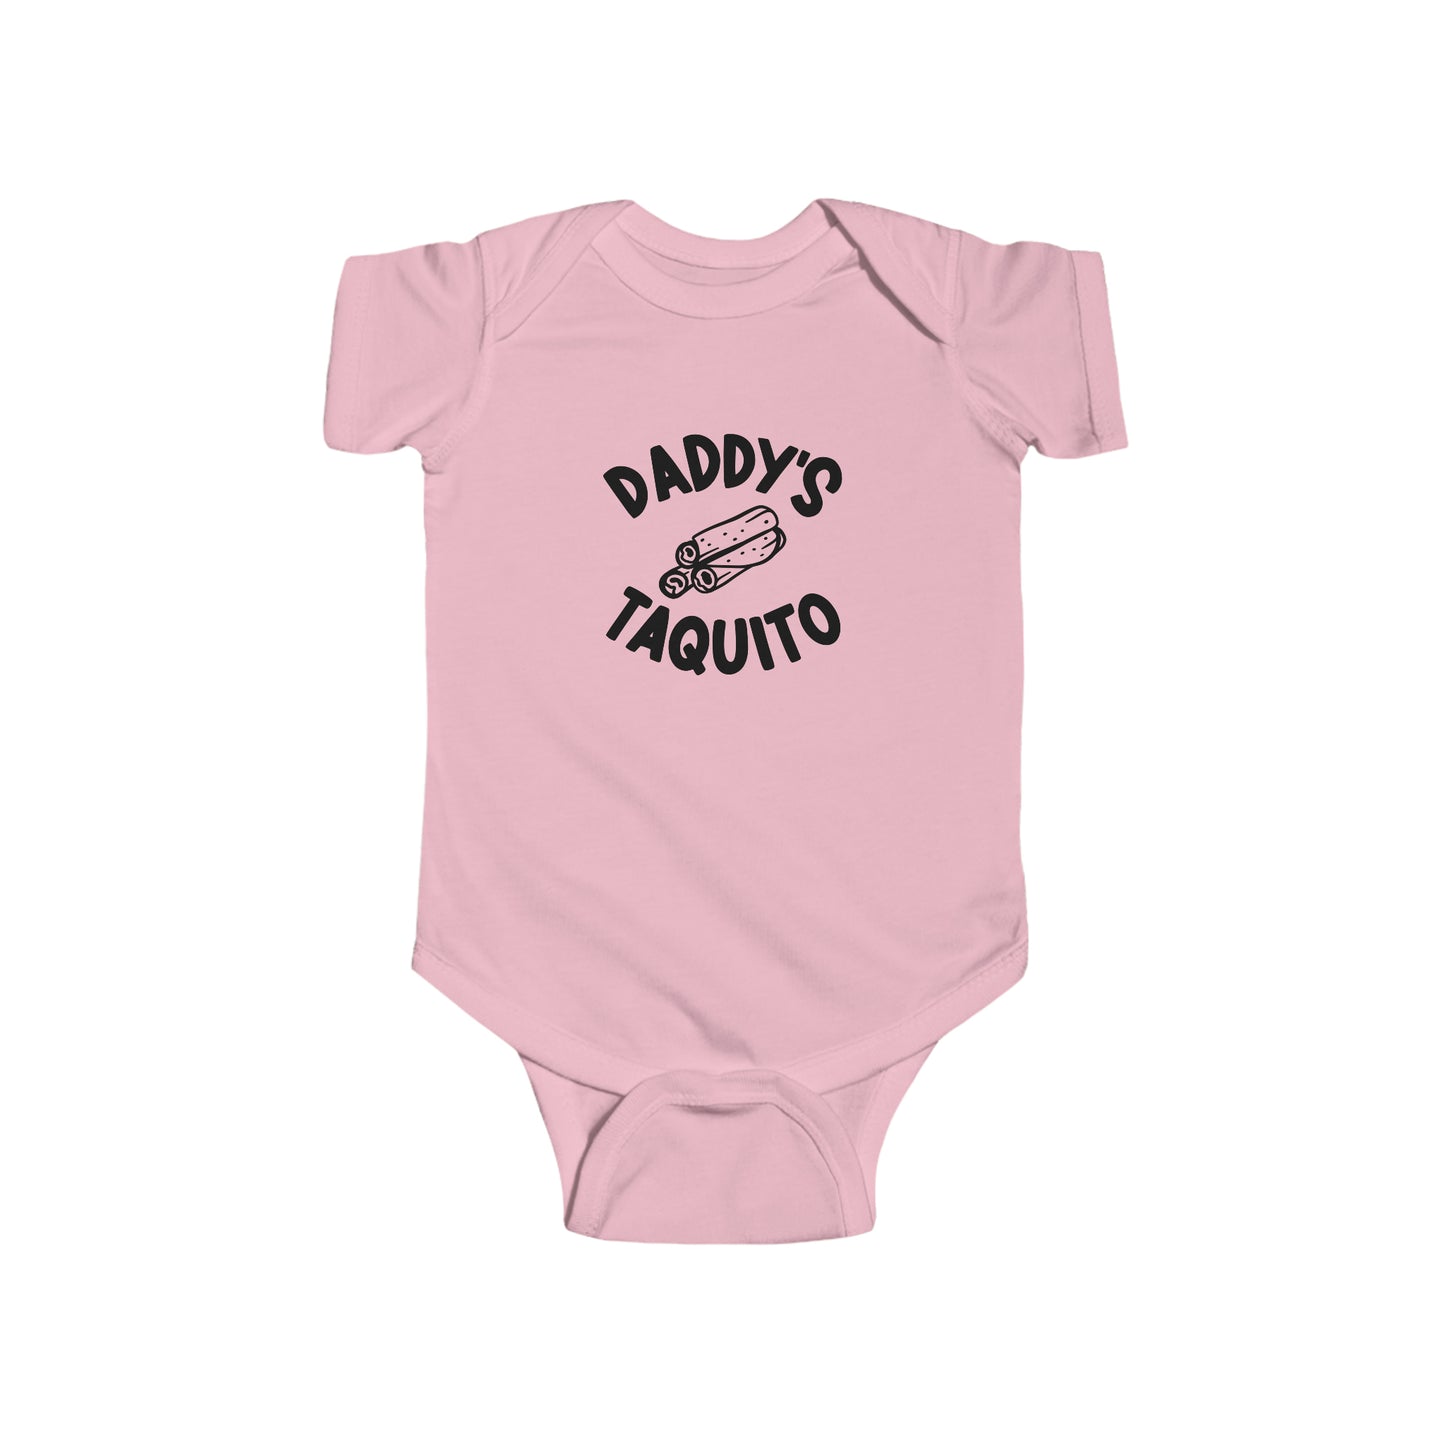 DADDY'S TAQUITO JERSEY ONSIE